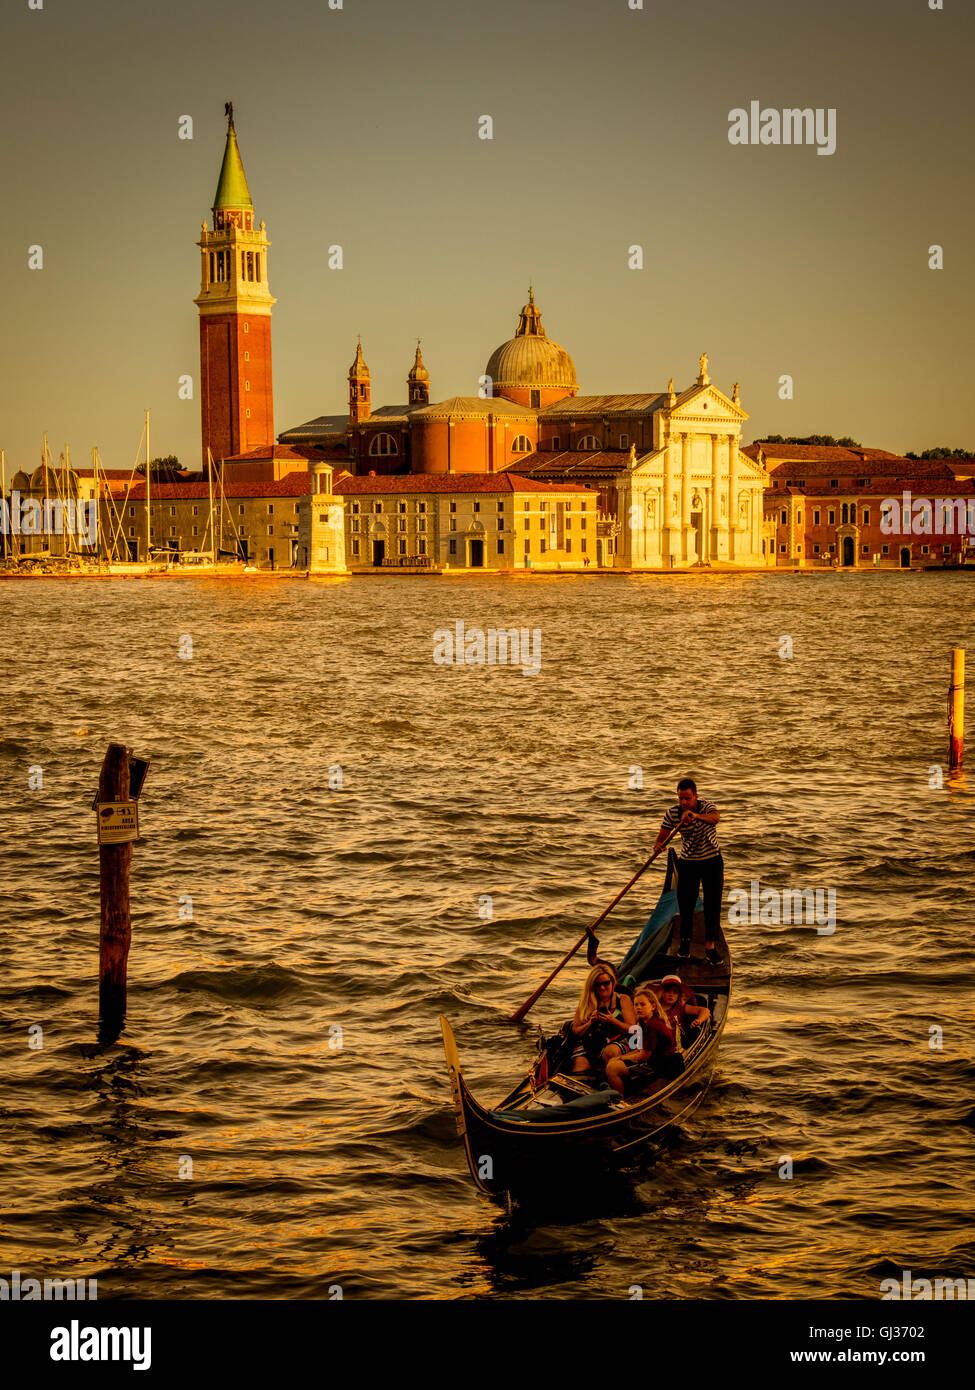 Single gondola on Canale di San Marco, at sunset with the island of San  Giorgio Maggiore in the background. Venice, Italy Stock Photo - Alamy